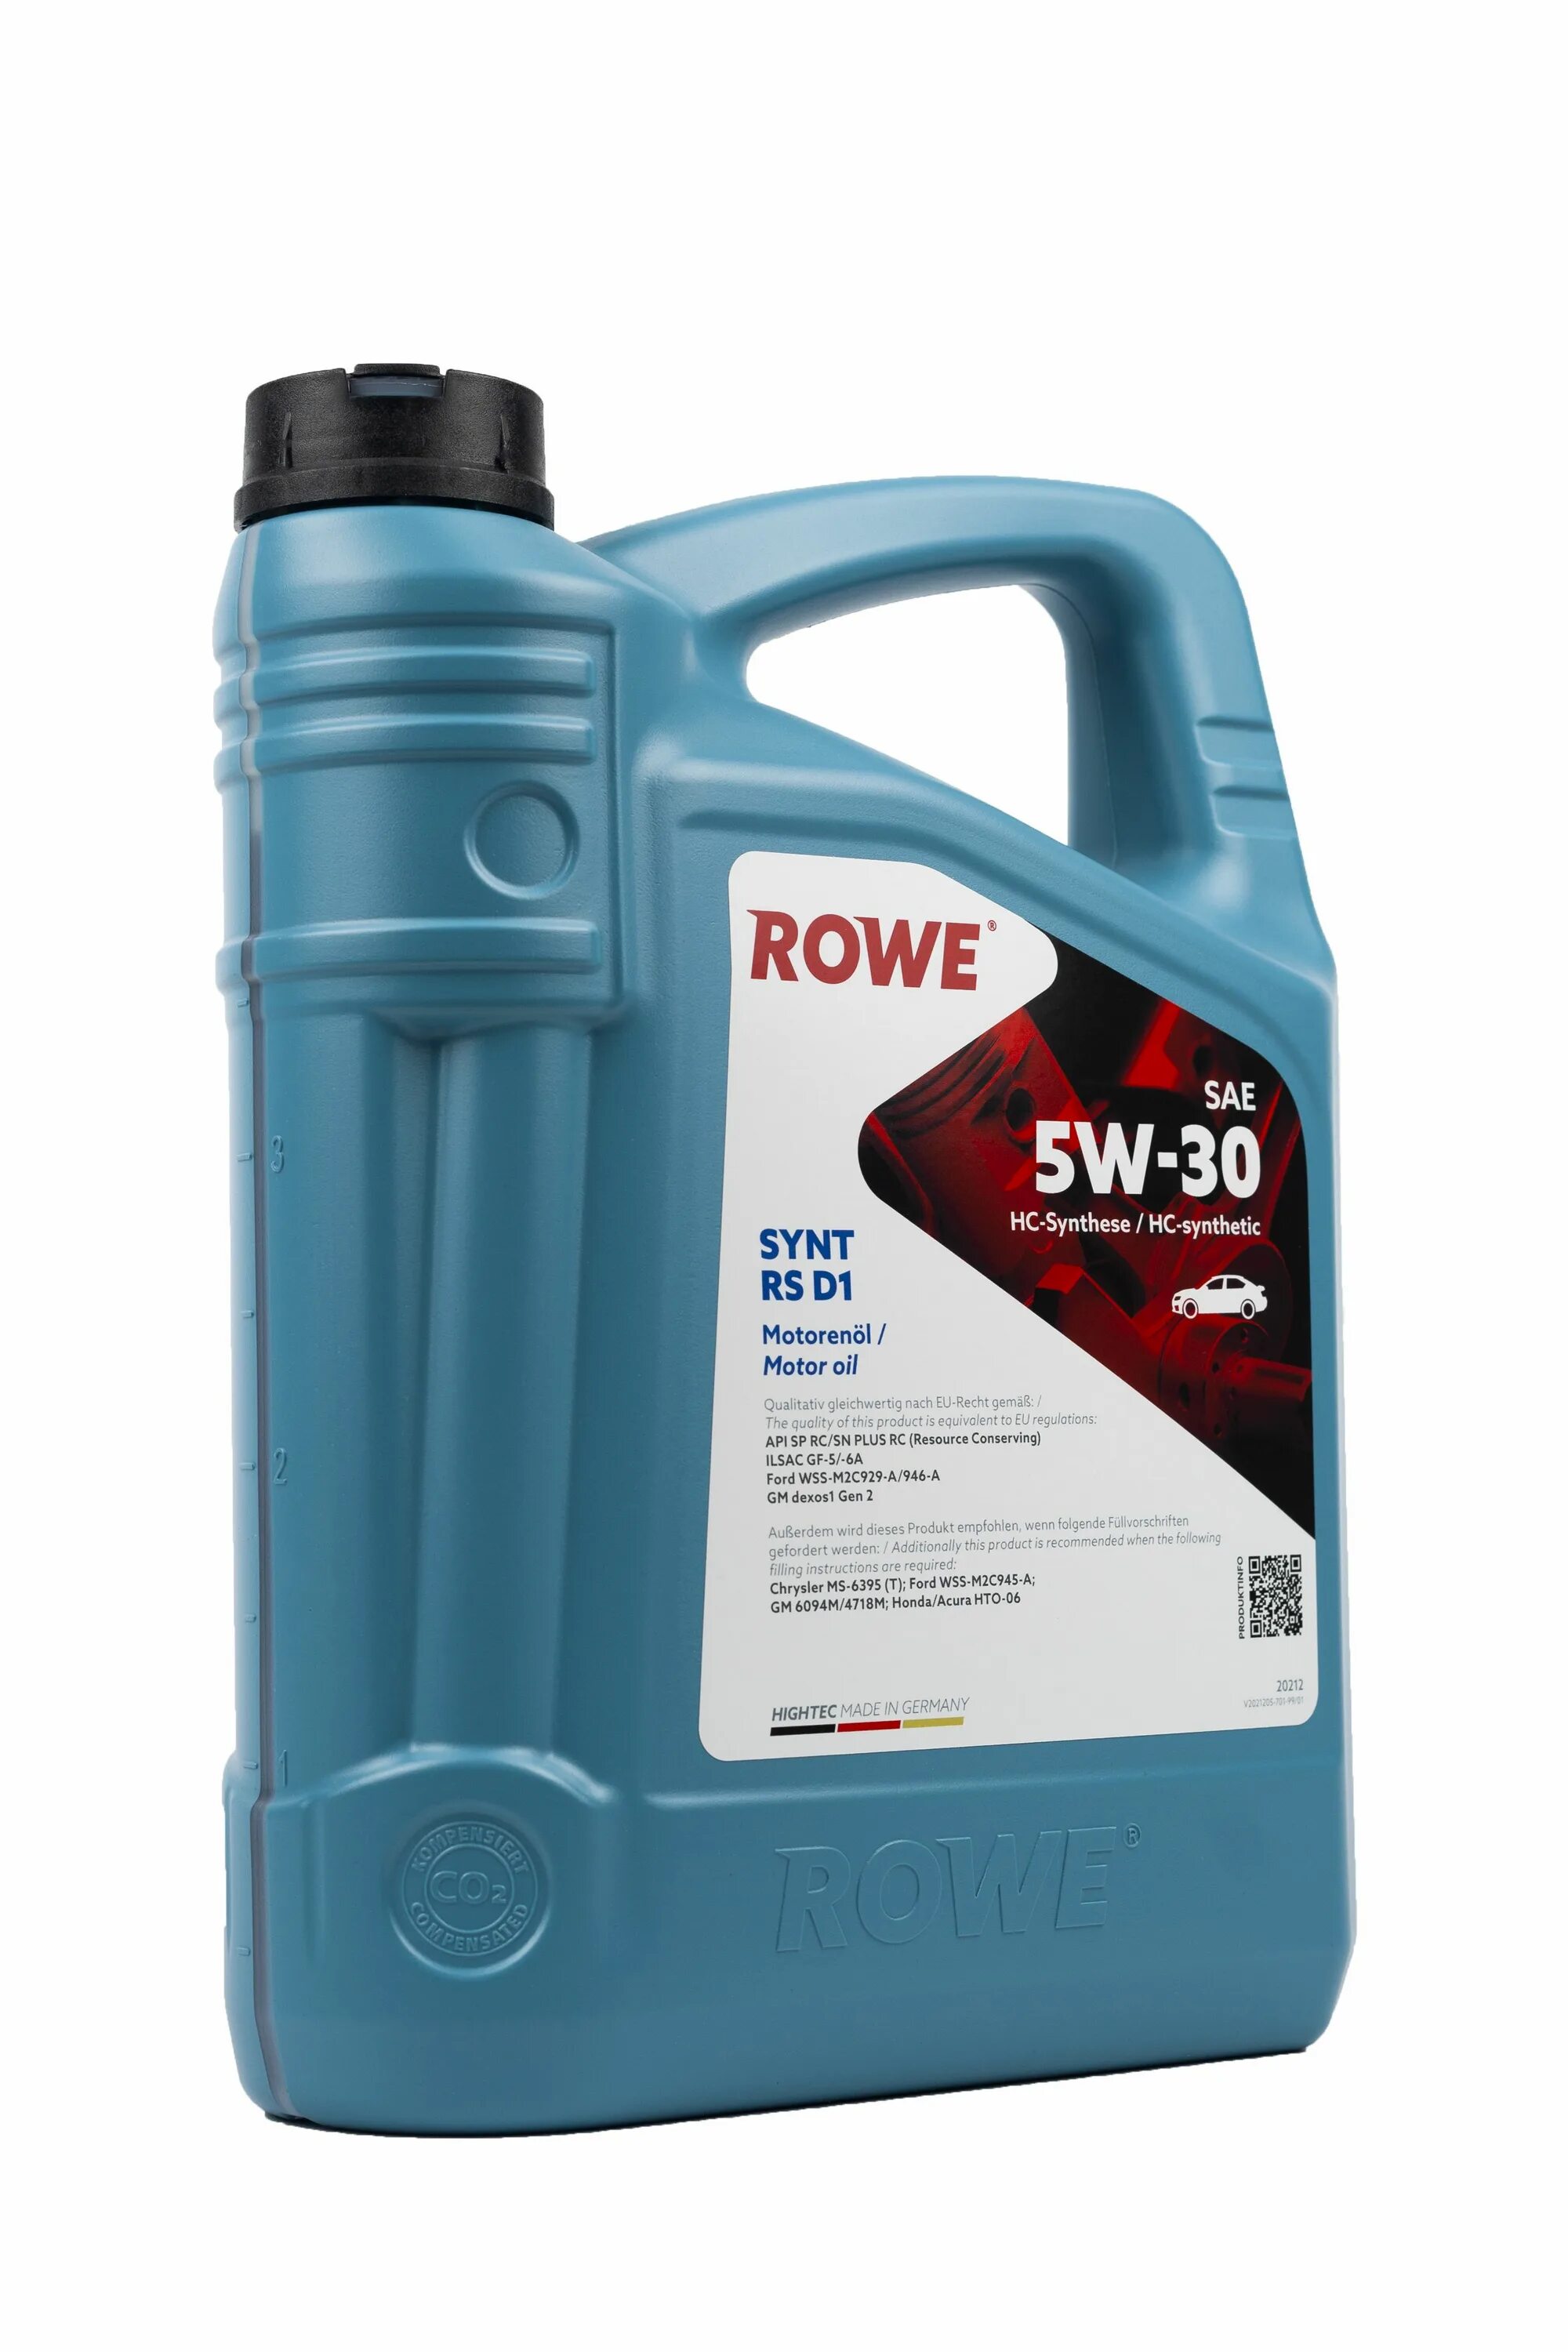 Масло ров 5w40. Rowe 5w30 Synt. Synt RS d1 5w-30 Rowe. Hightec Synt RS d1 SAE 5w-30. Моторное масло Rowe 5w40.